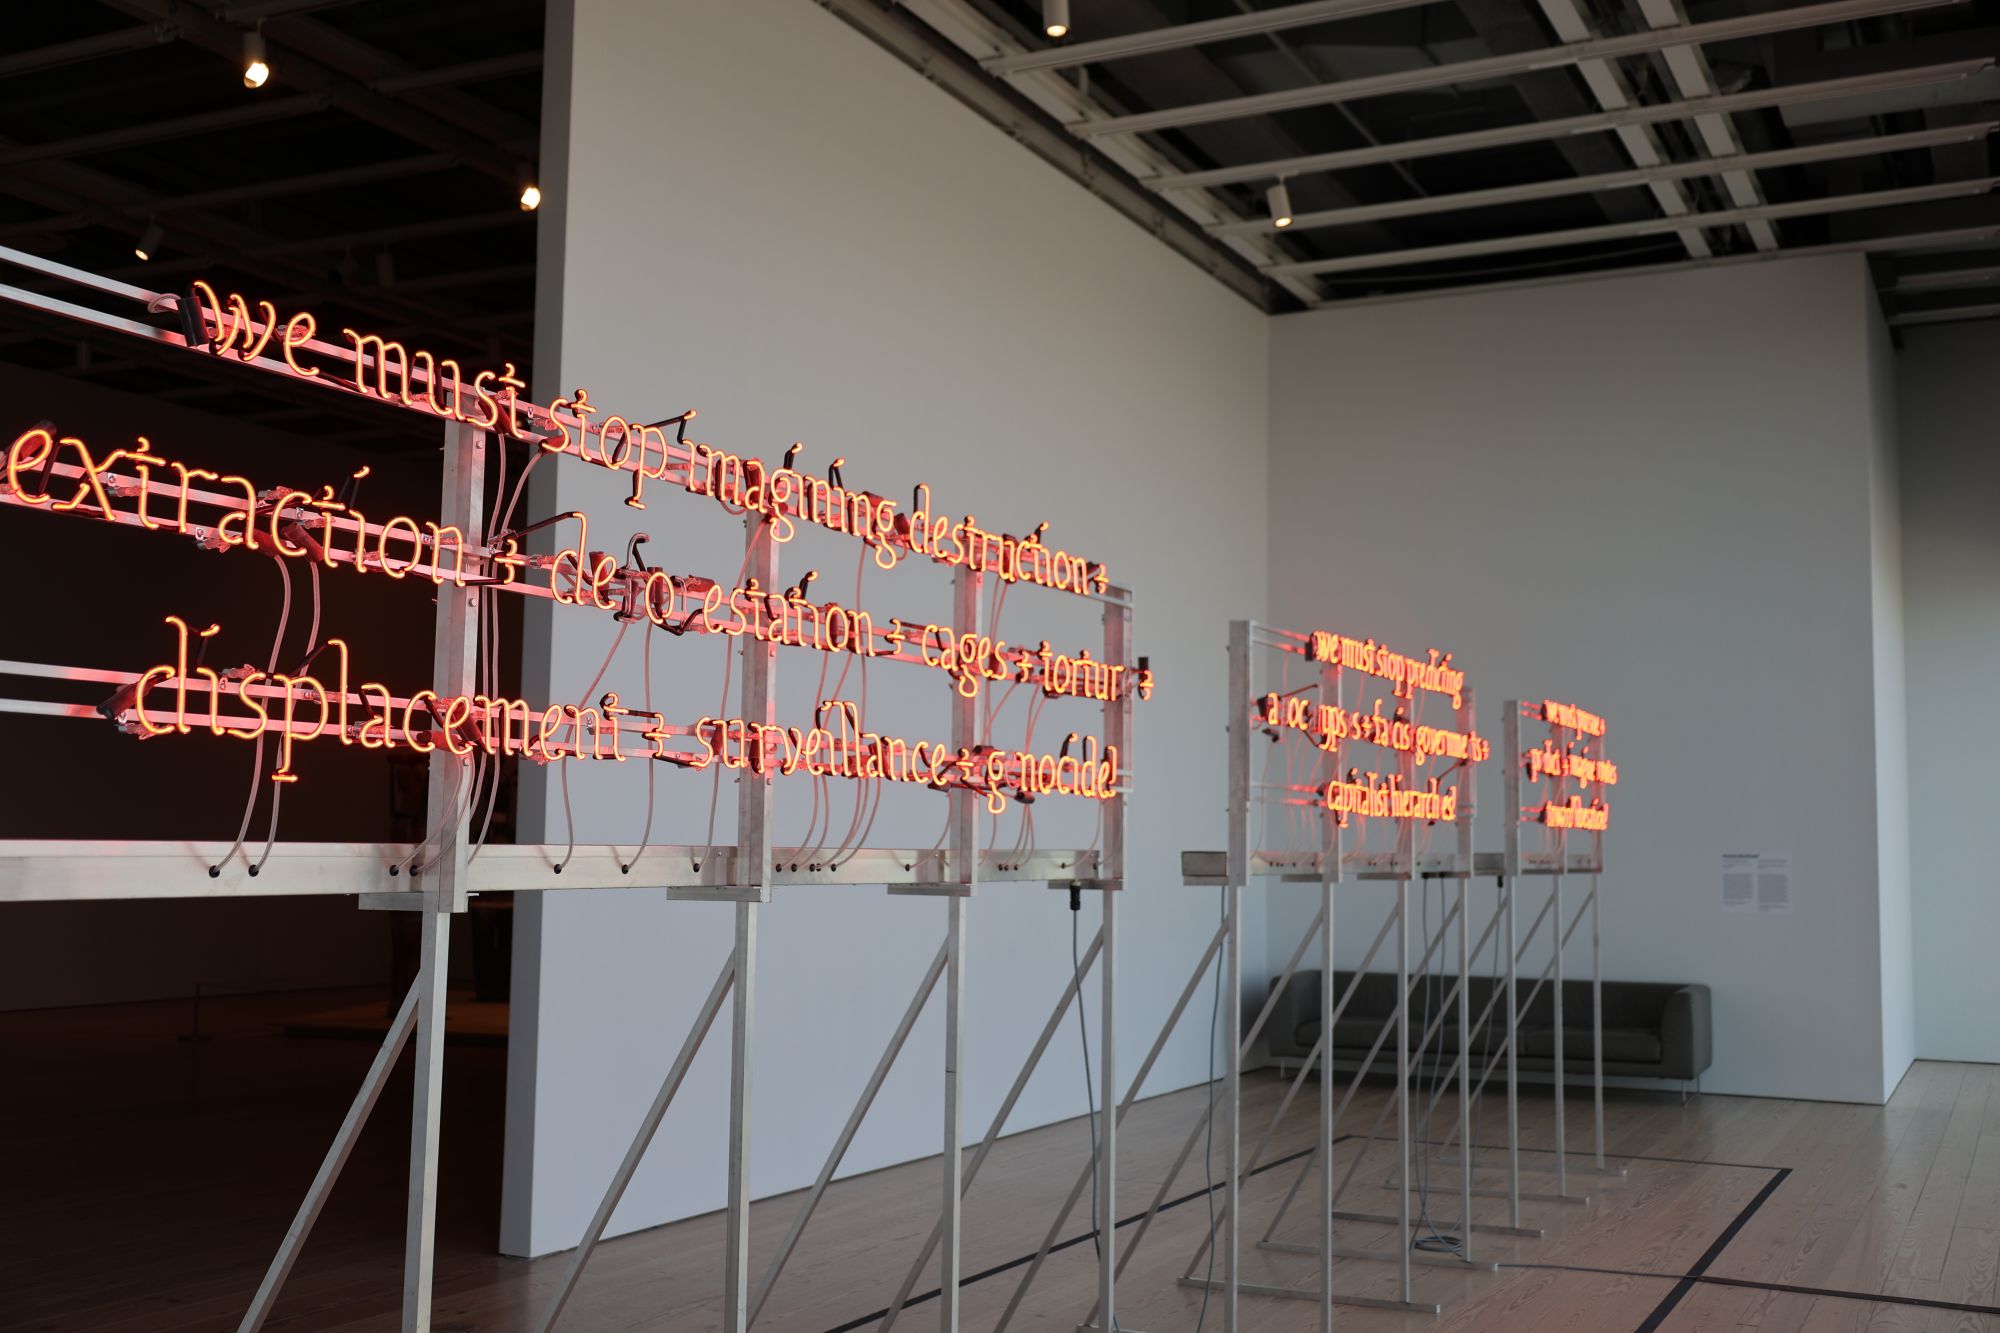 In Demian DinéYazhi´'s neon poetry, flickering letters spelled the hidden plea “Free Palestine.” The hidden component to the Diné artist's installation was unknown to the Whitney Biennial’s curators.